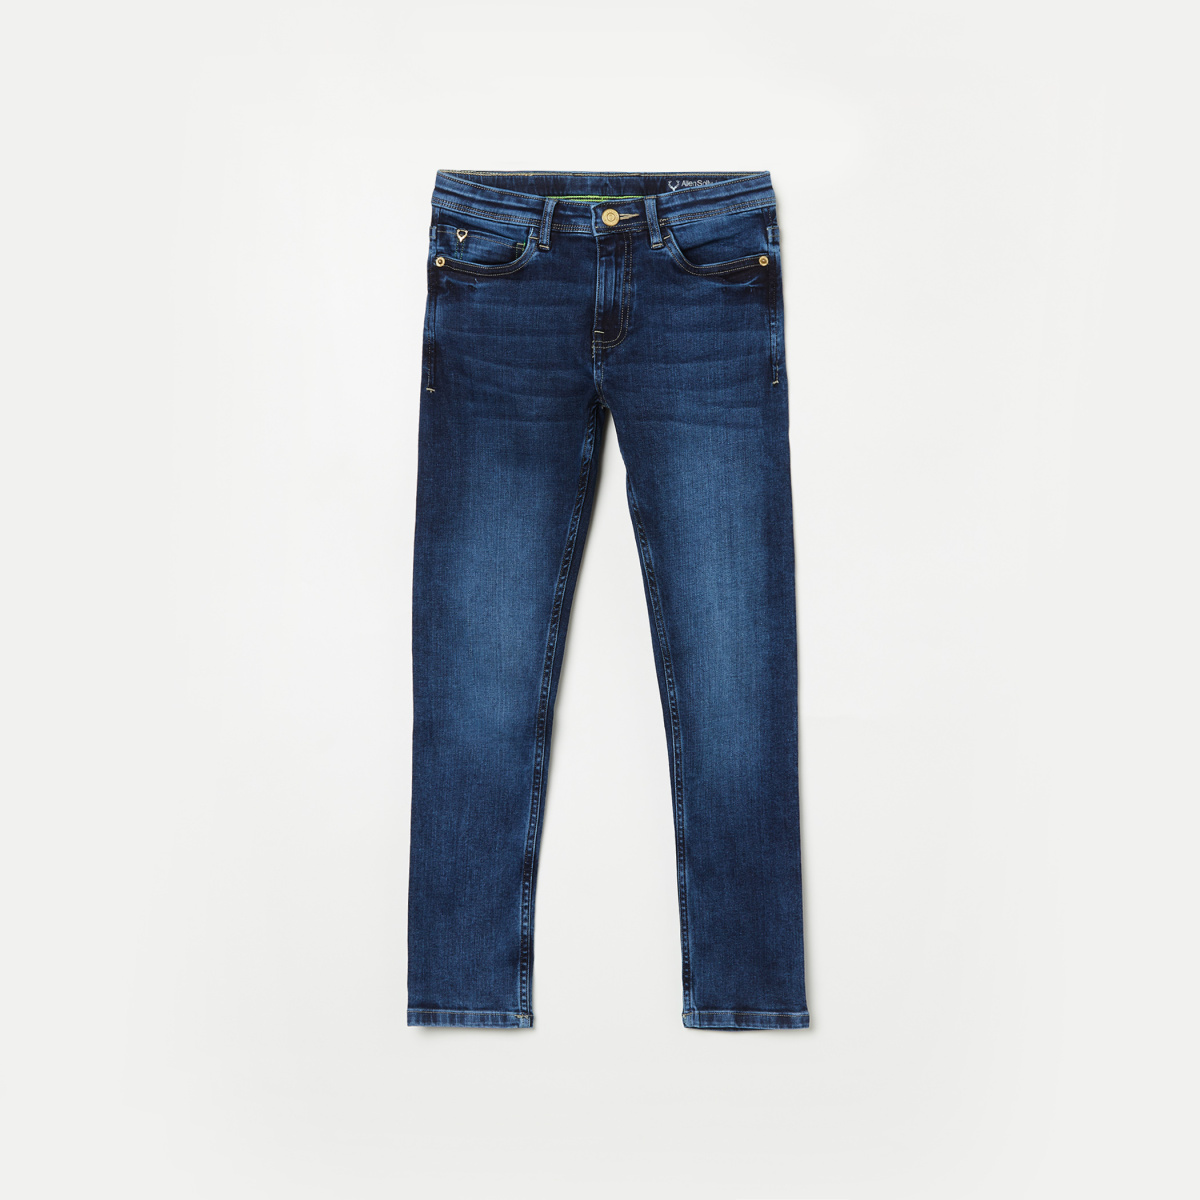 ALLEN SOLLY Boys Medium-Washed Skinny Fit Jeans